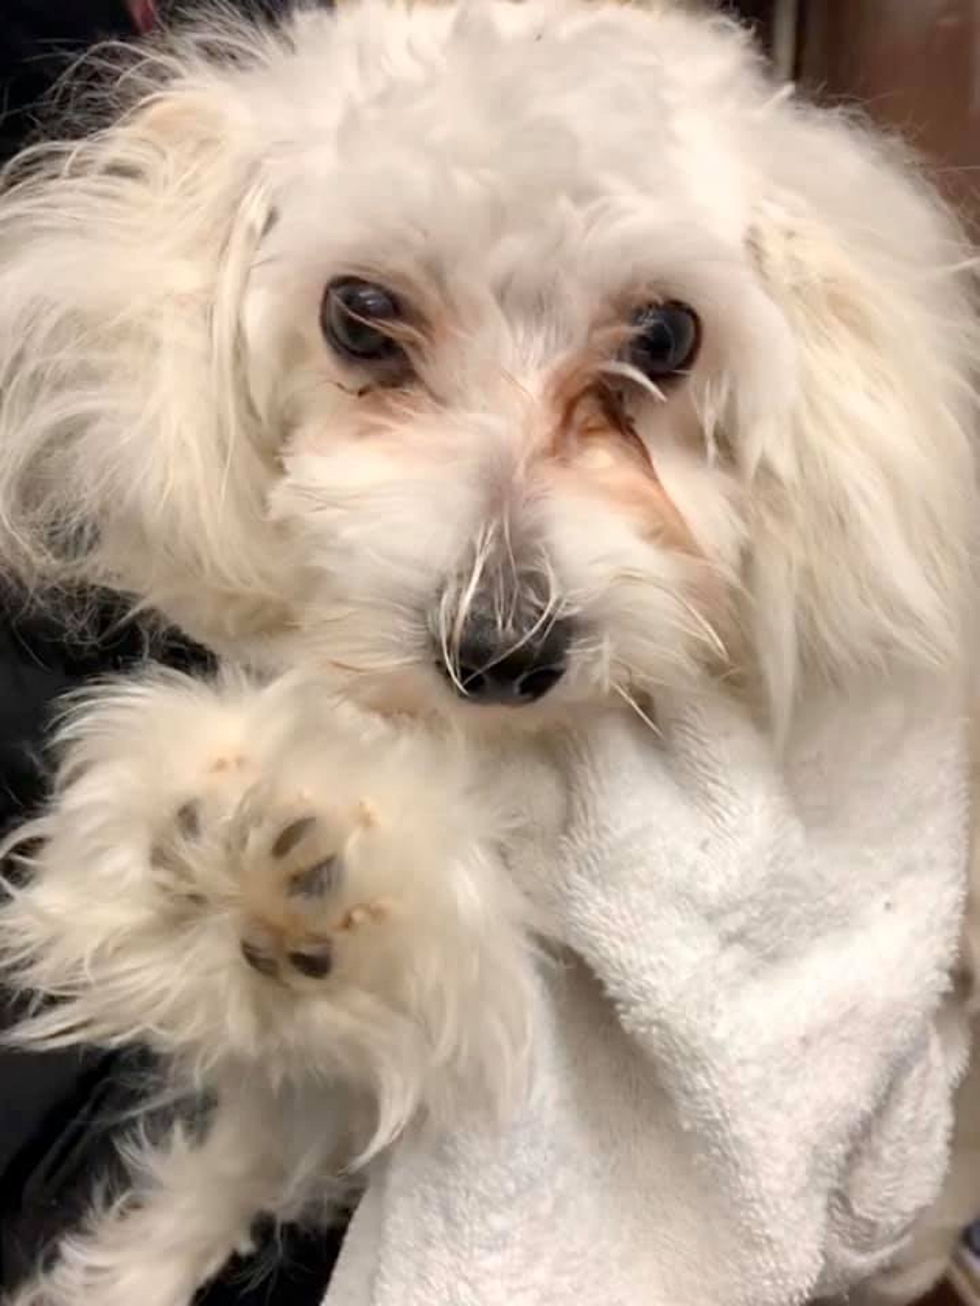 Lost Dog in Sweater Found on I-84 in Danbury